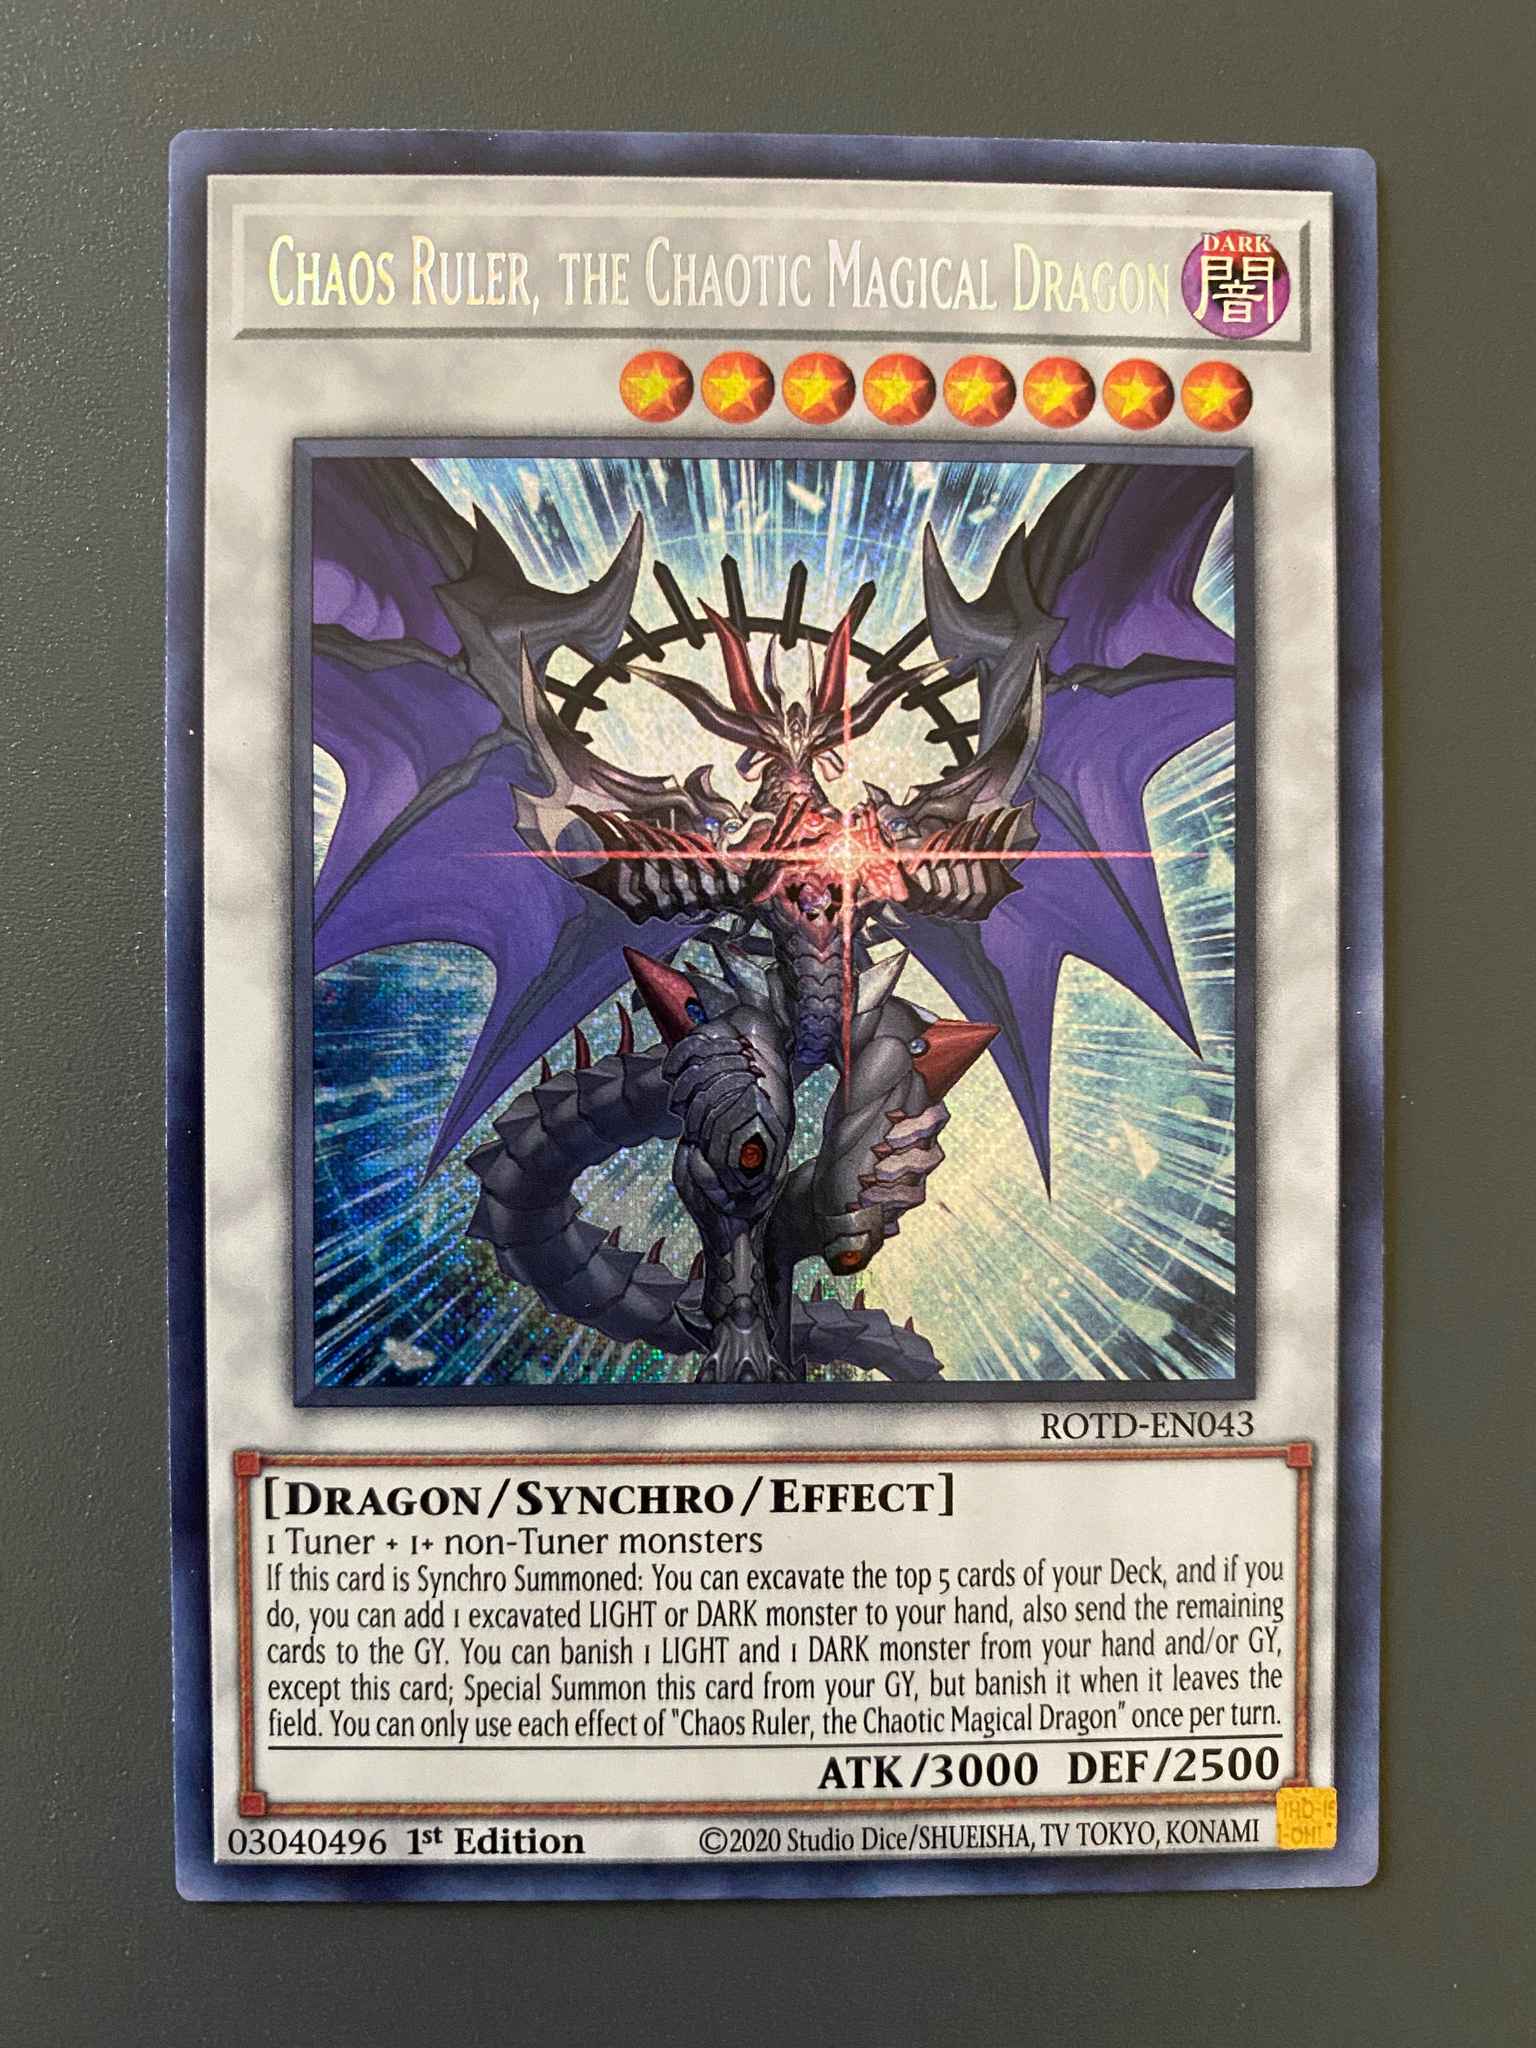 Chaos Ruler The Chaotic Magical Dragon ROTD-EN043 1st Edition Mint Yugioh 